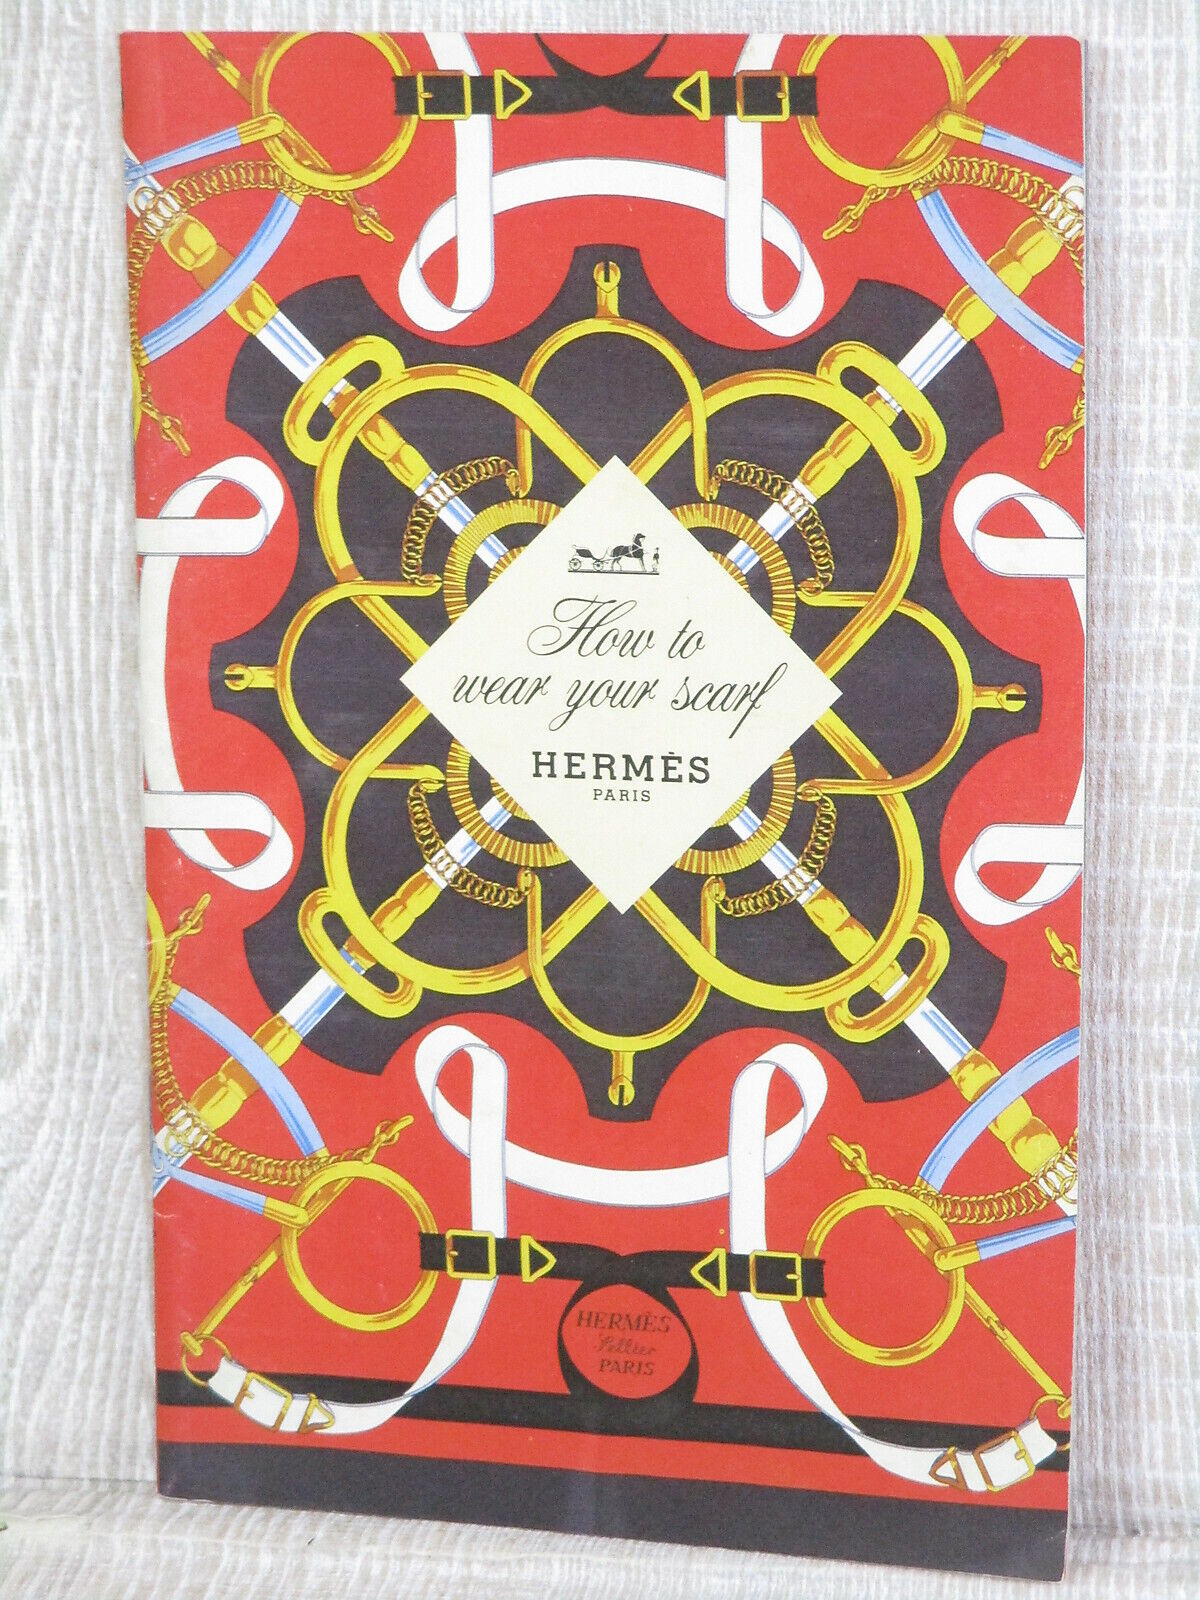 HERMES Paris CARRE How to Wear Your Scarf Fashion Mode Photo Book Ltd Booklet